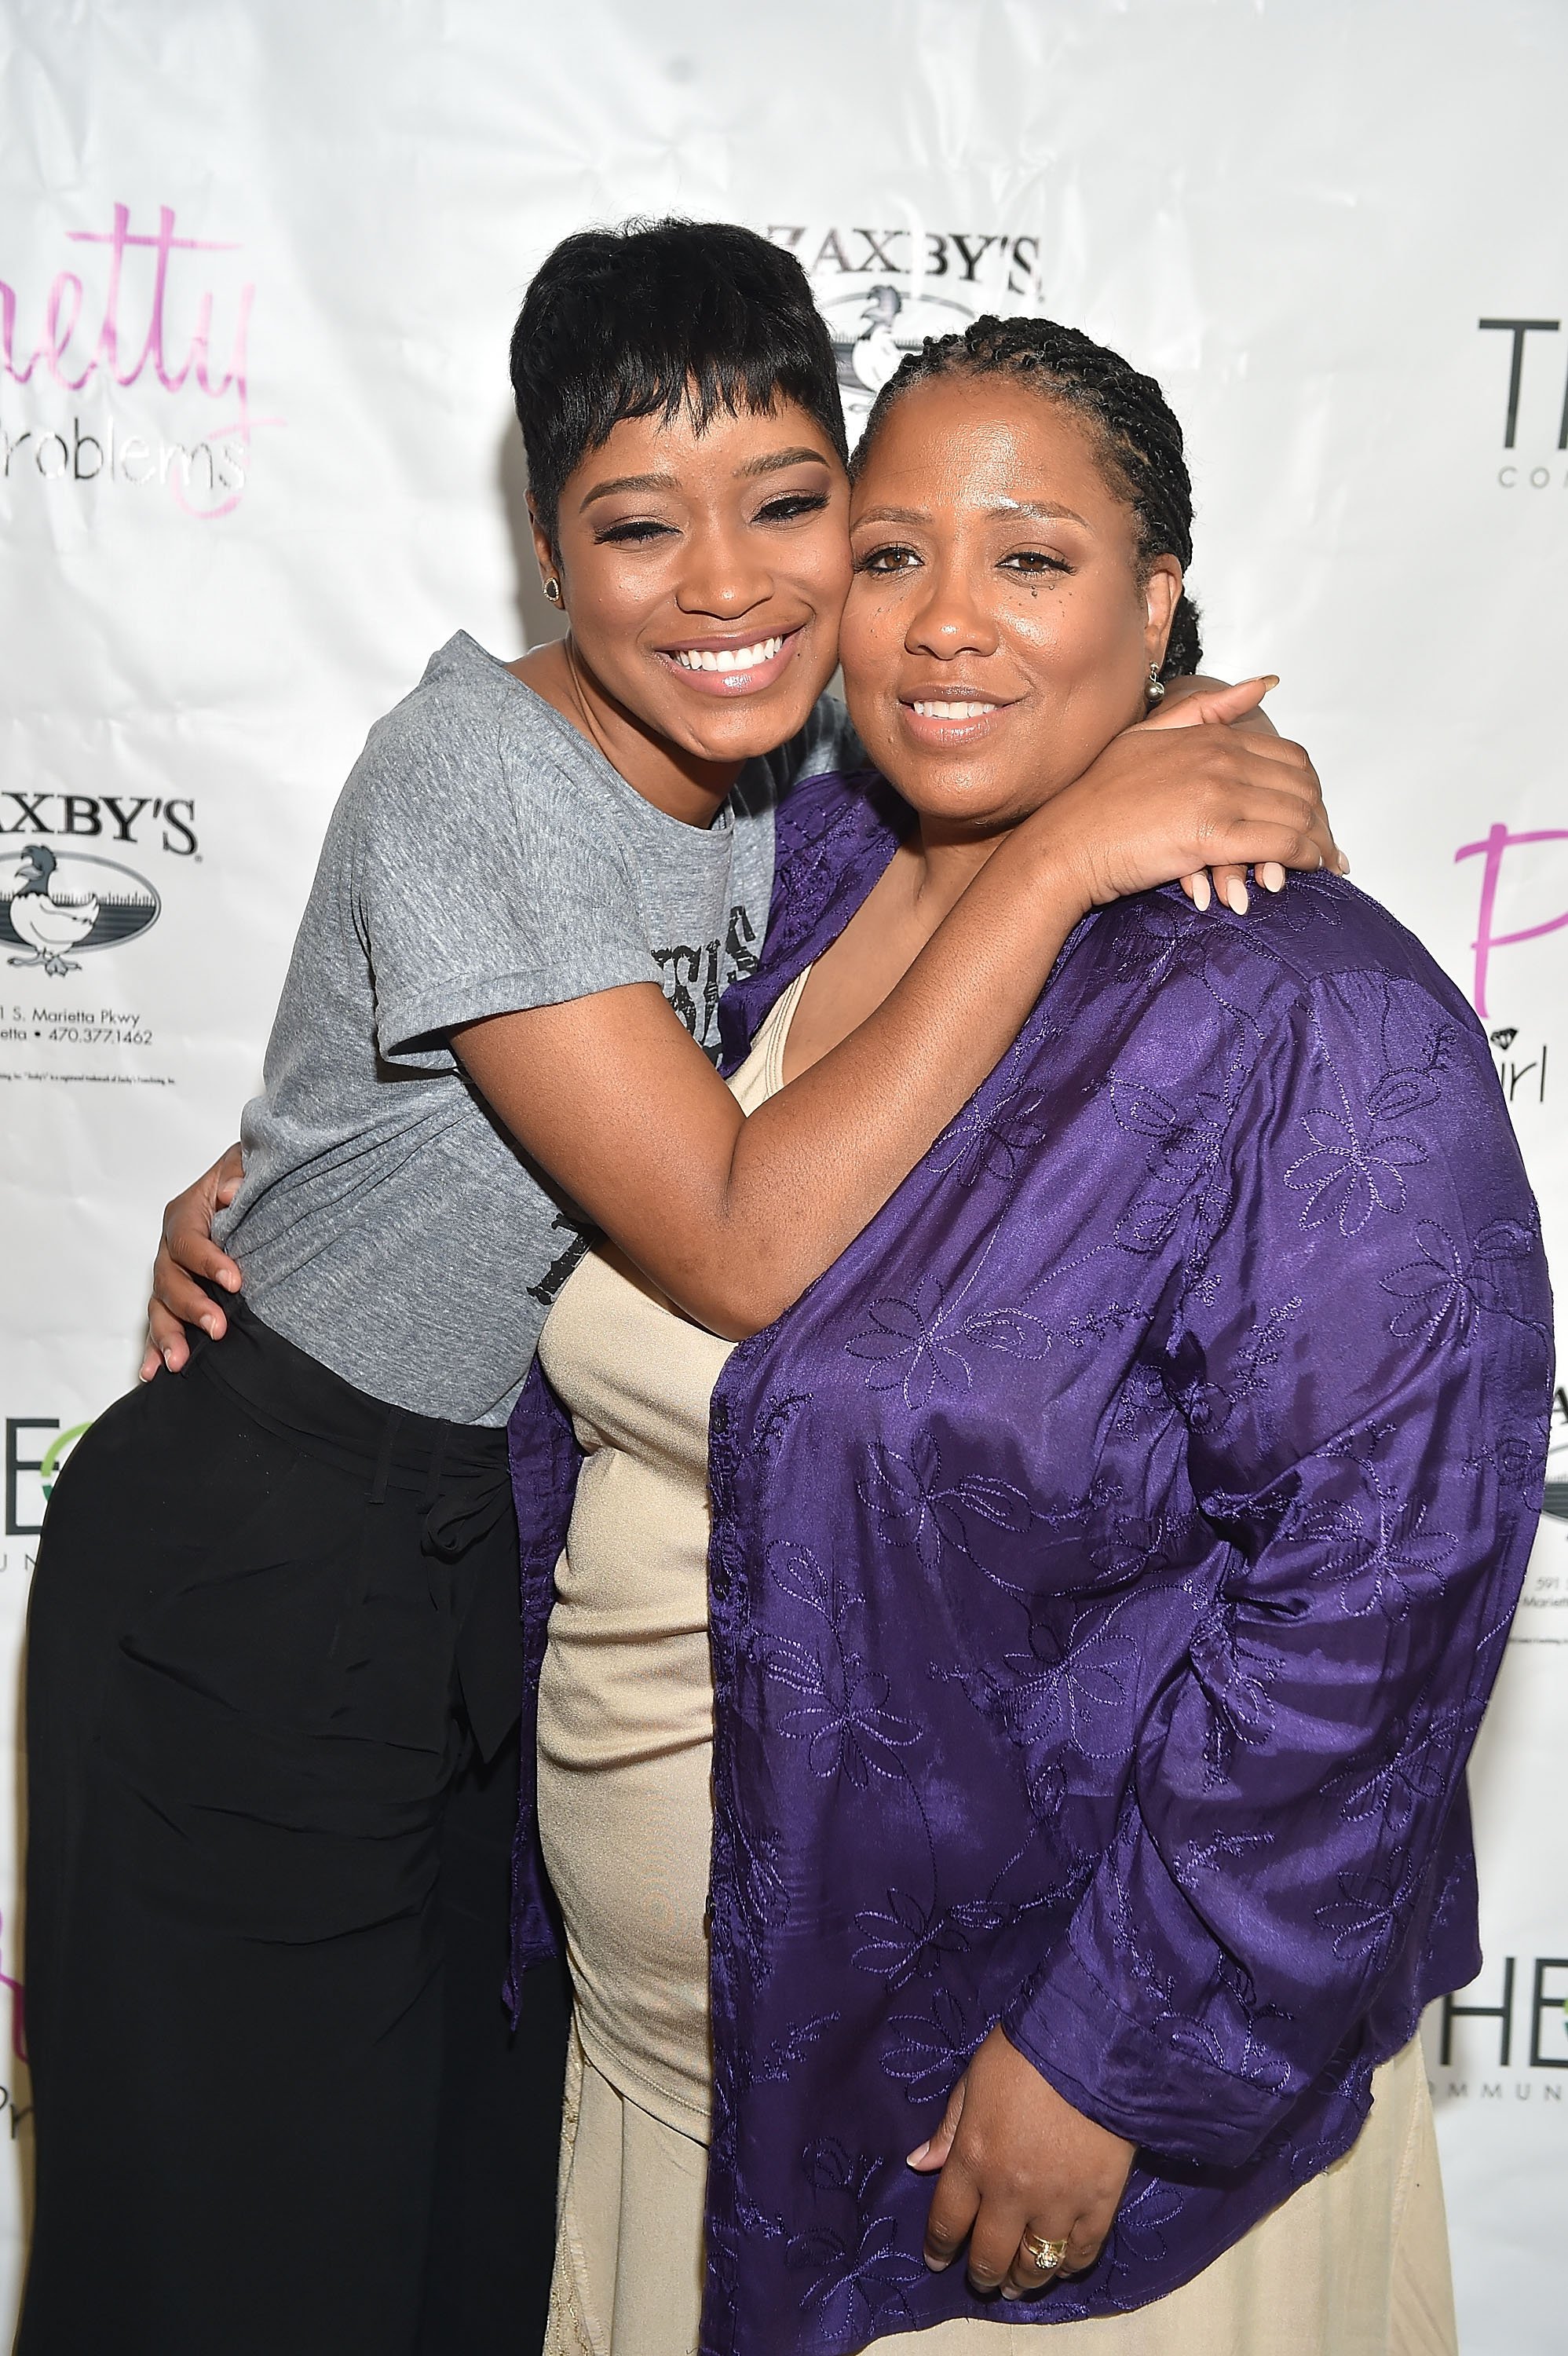 Keke Palmer and her mother Sharon pose during an event at Mansour Center in Atlanta on May 30, 2015. | Source: Getty Images